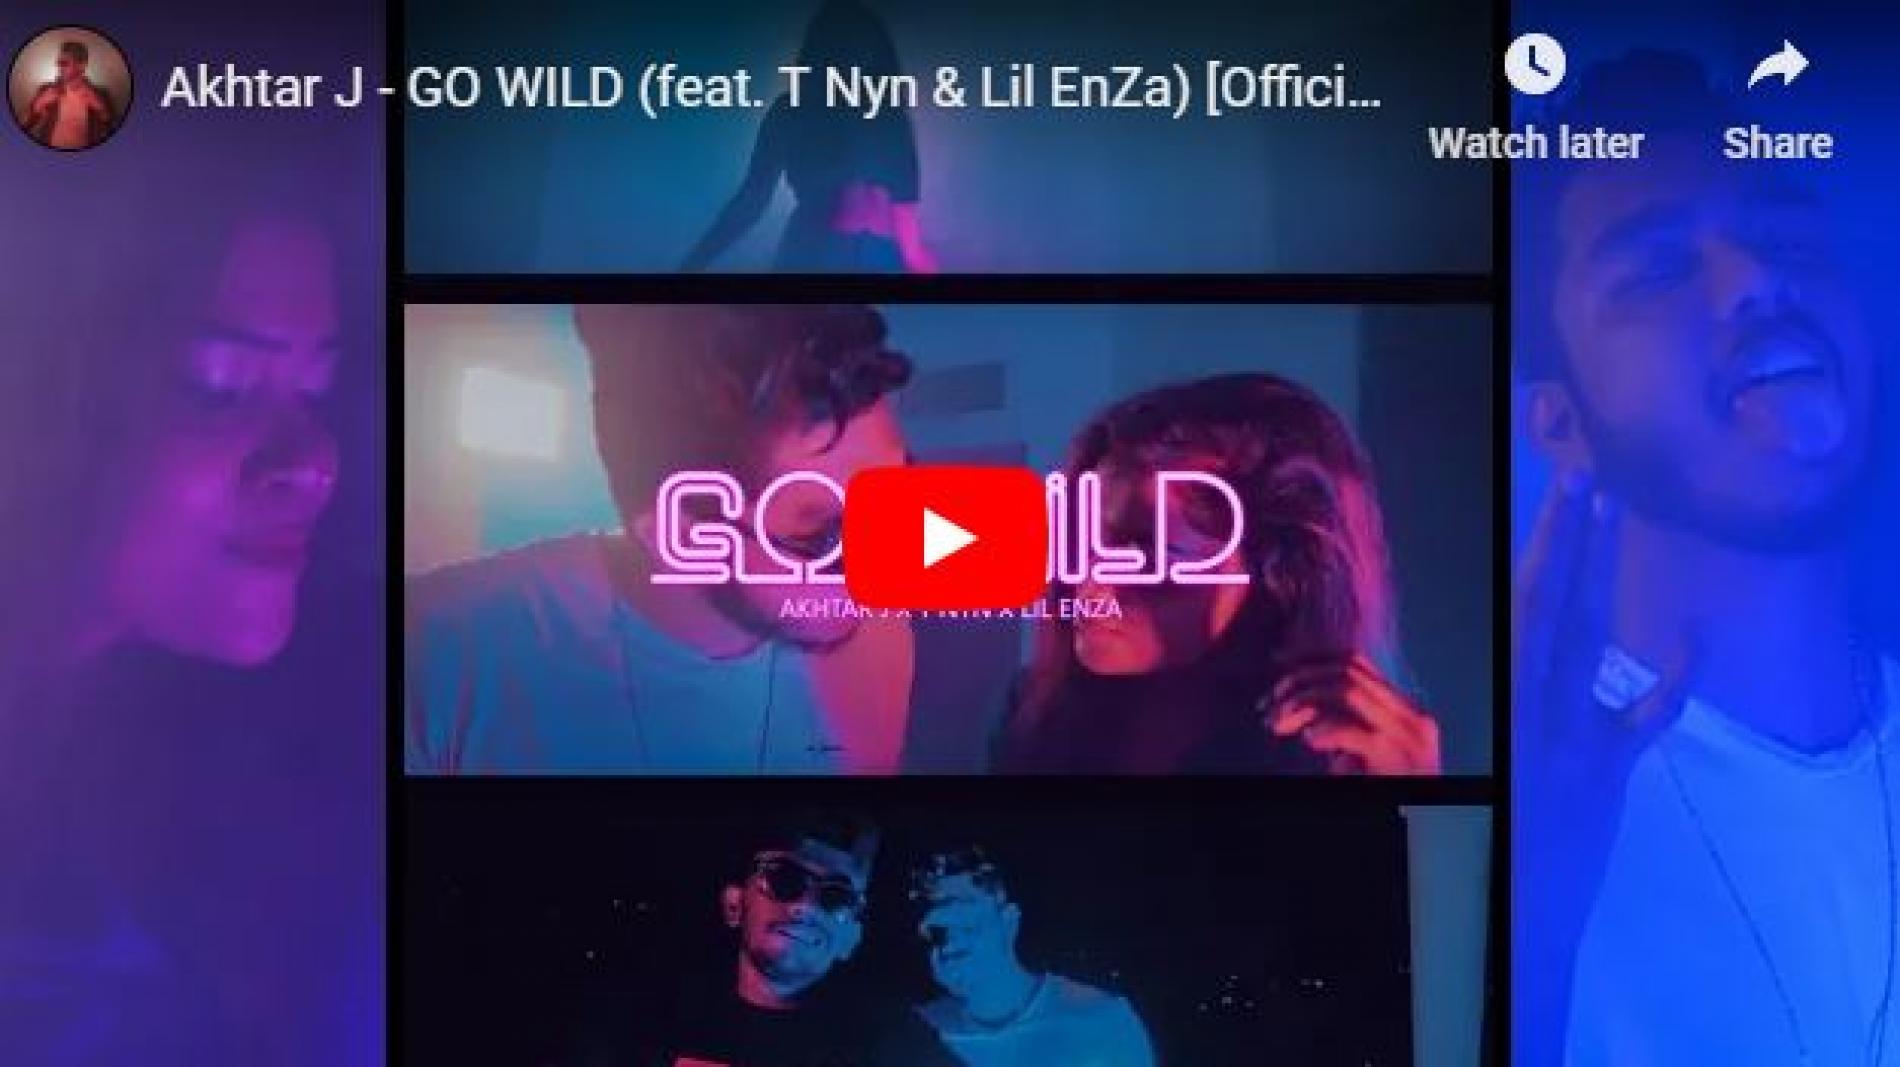 New Music : Akhtar J – GO WILD (feat T Nyn & Lil EnZa) [Official Music Video]